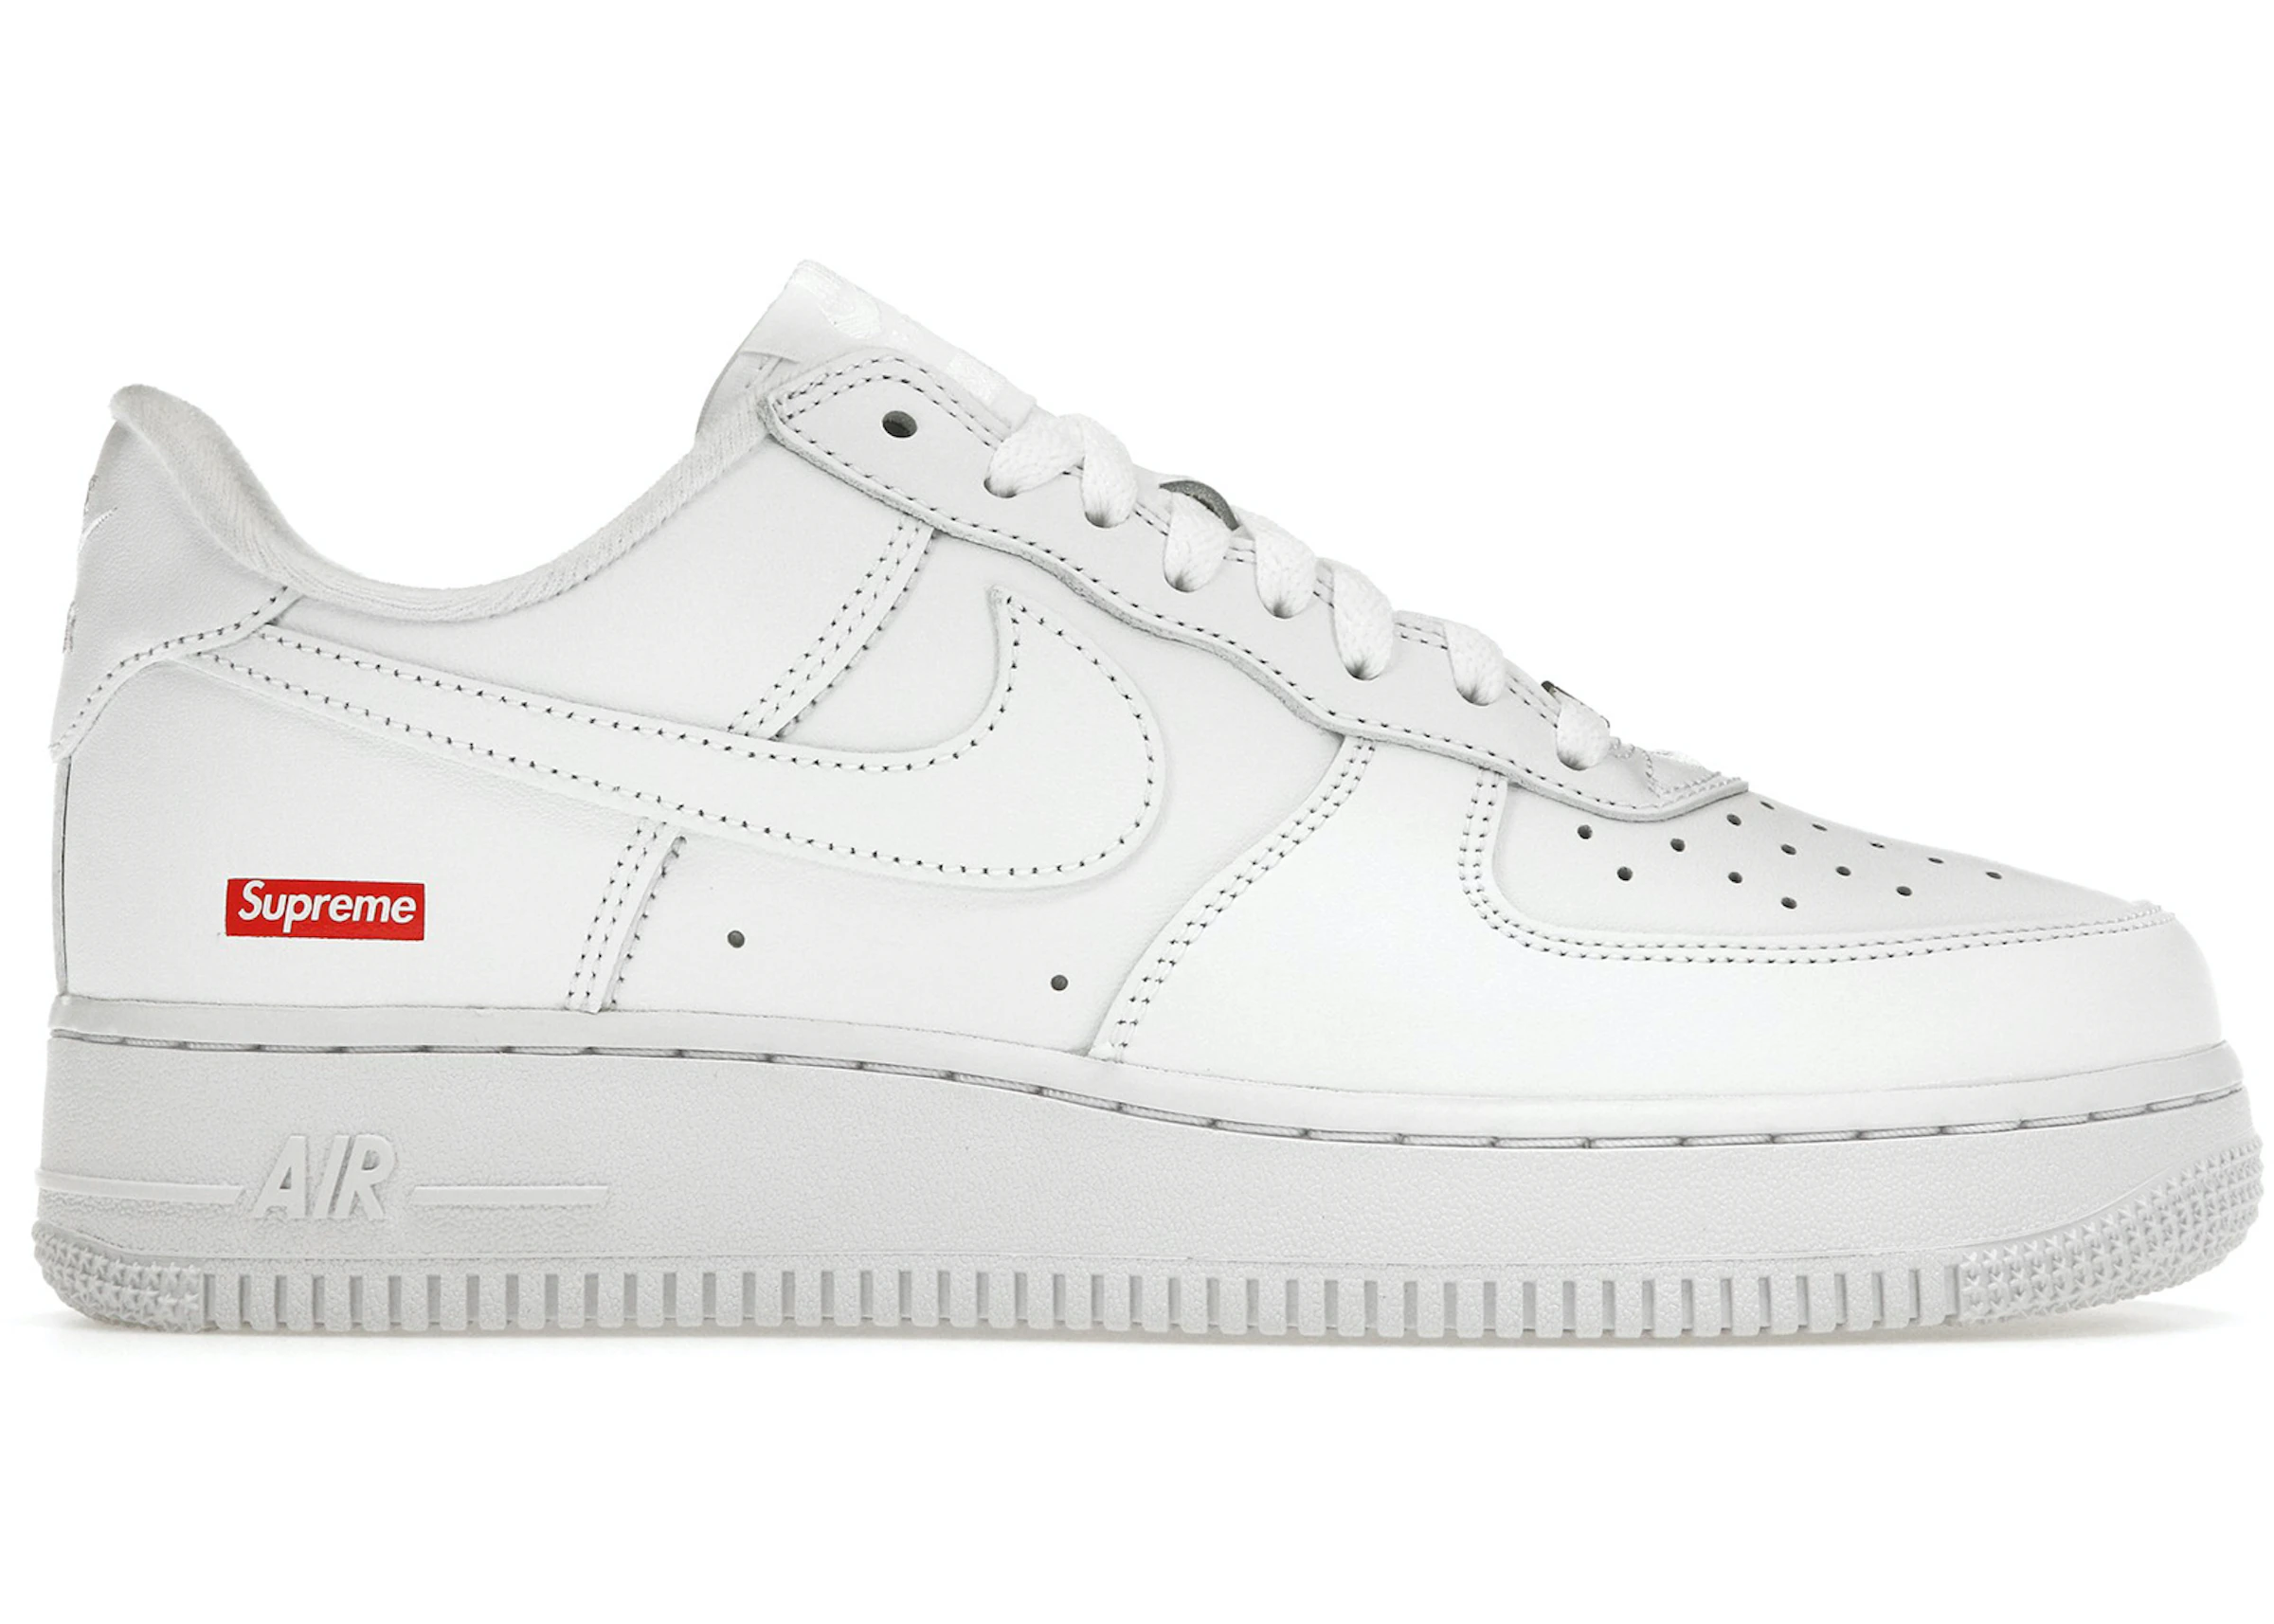 credit unrelated All the time Nike Air Force 1 Low Supreme White - CU9225-100 - US